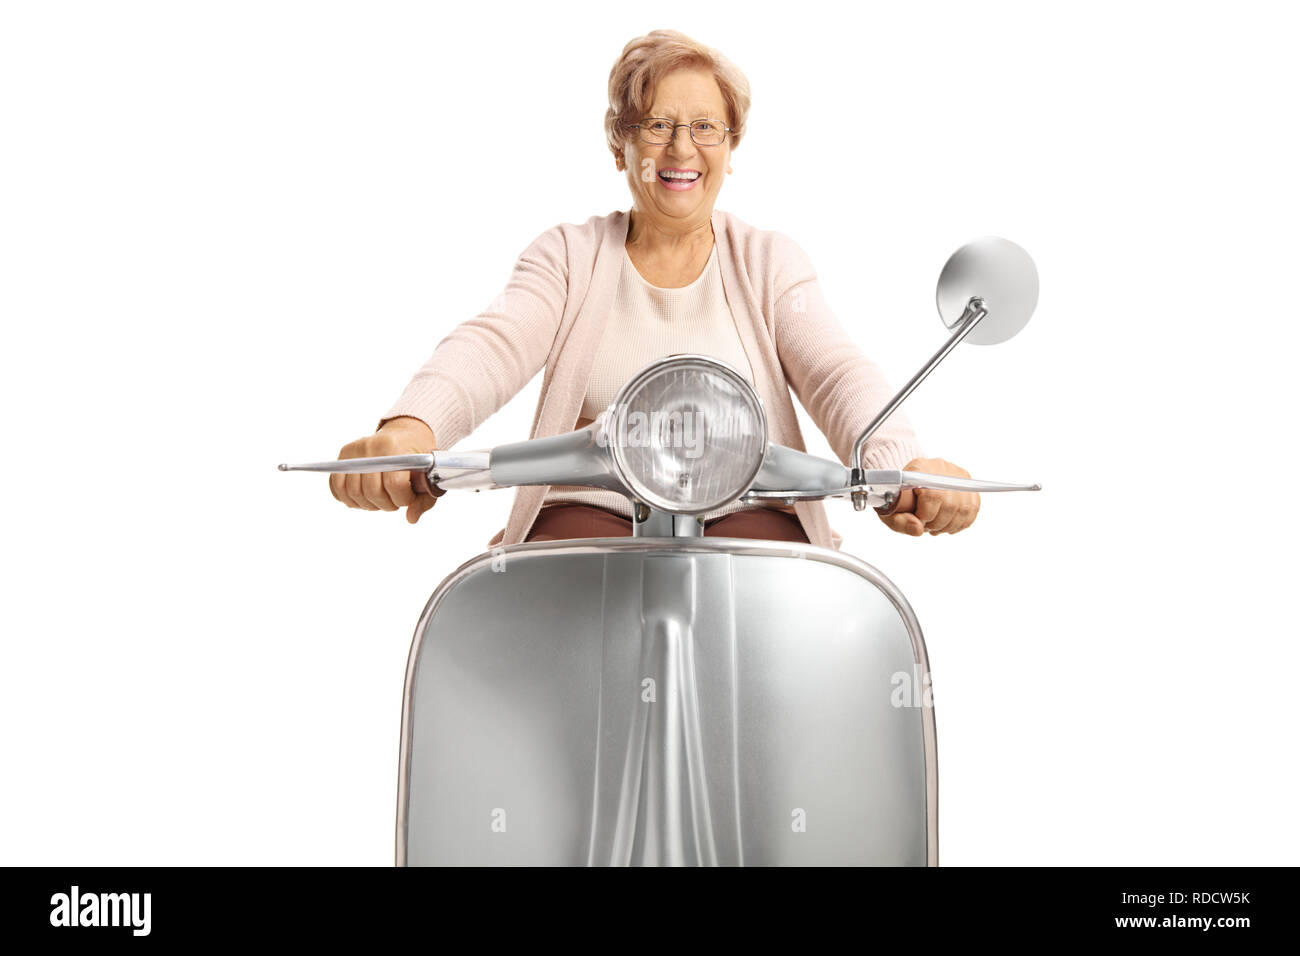 Cheerful senior woman riding a vintage scooter isolated on white background Stock Photo